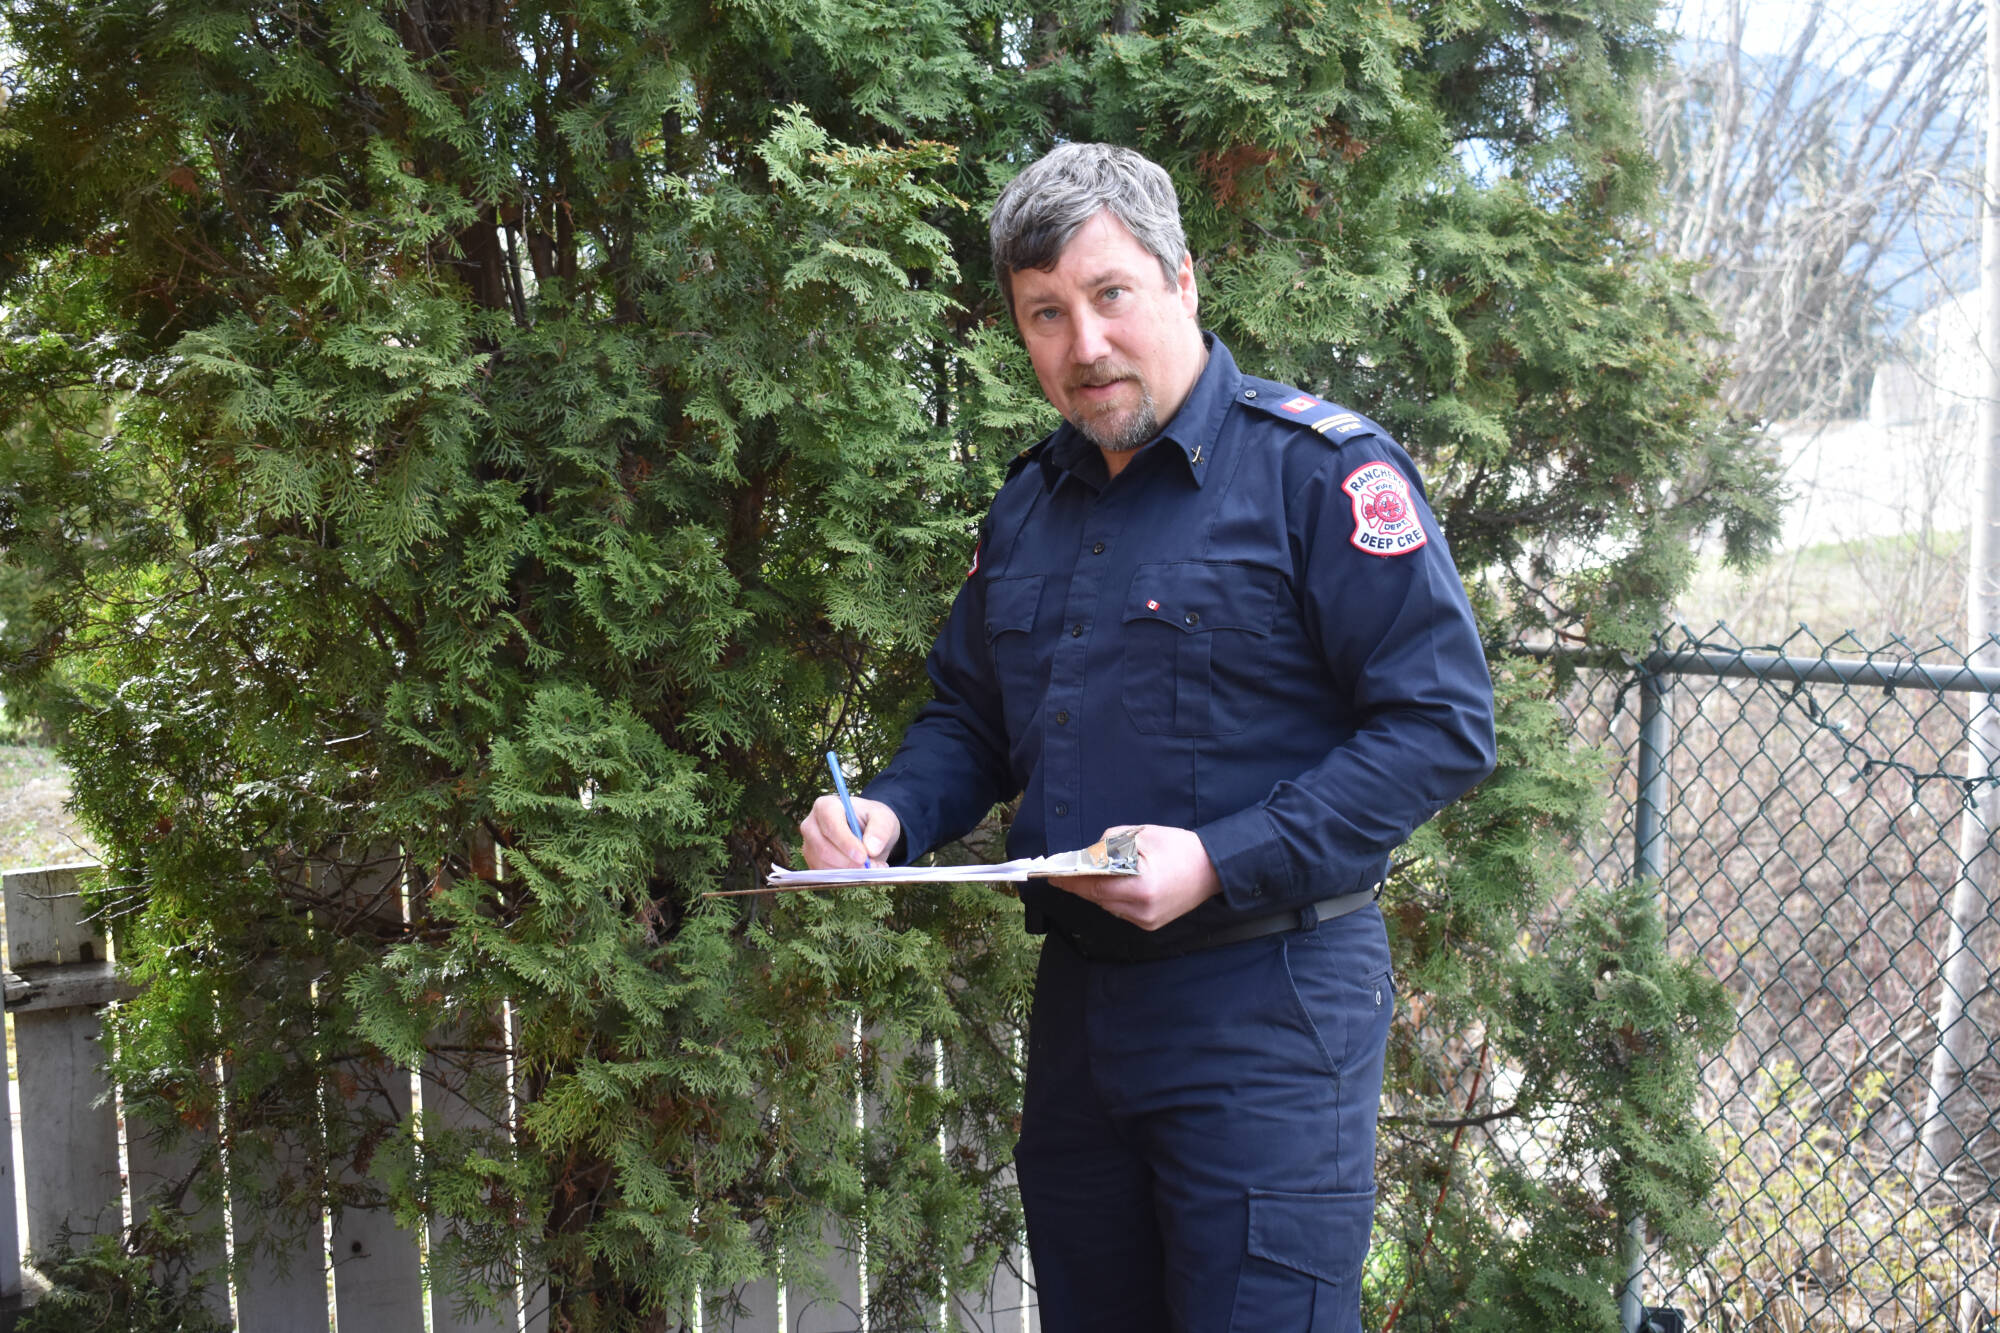 When it comes to landscaping options, Columbia Shuswap Regional District FireSmart Co-ordinator Len Youden strongly advises against the use of junipers and cedars. (Contributed)